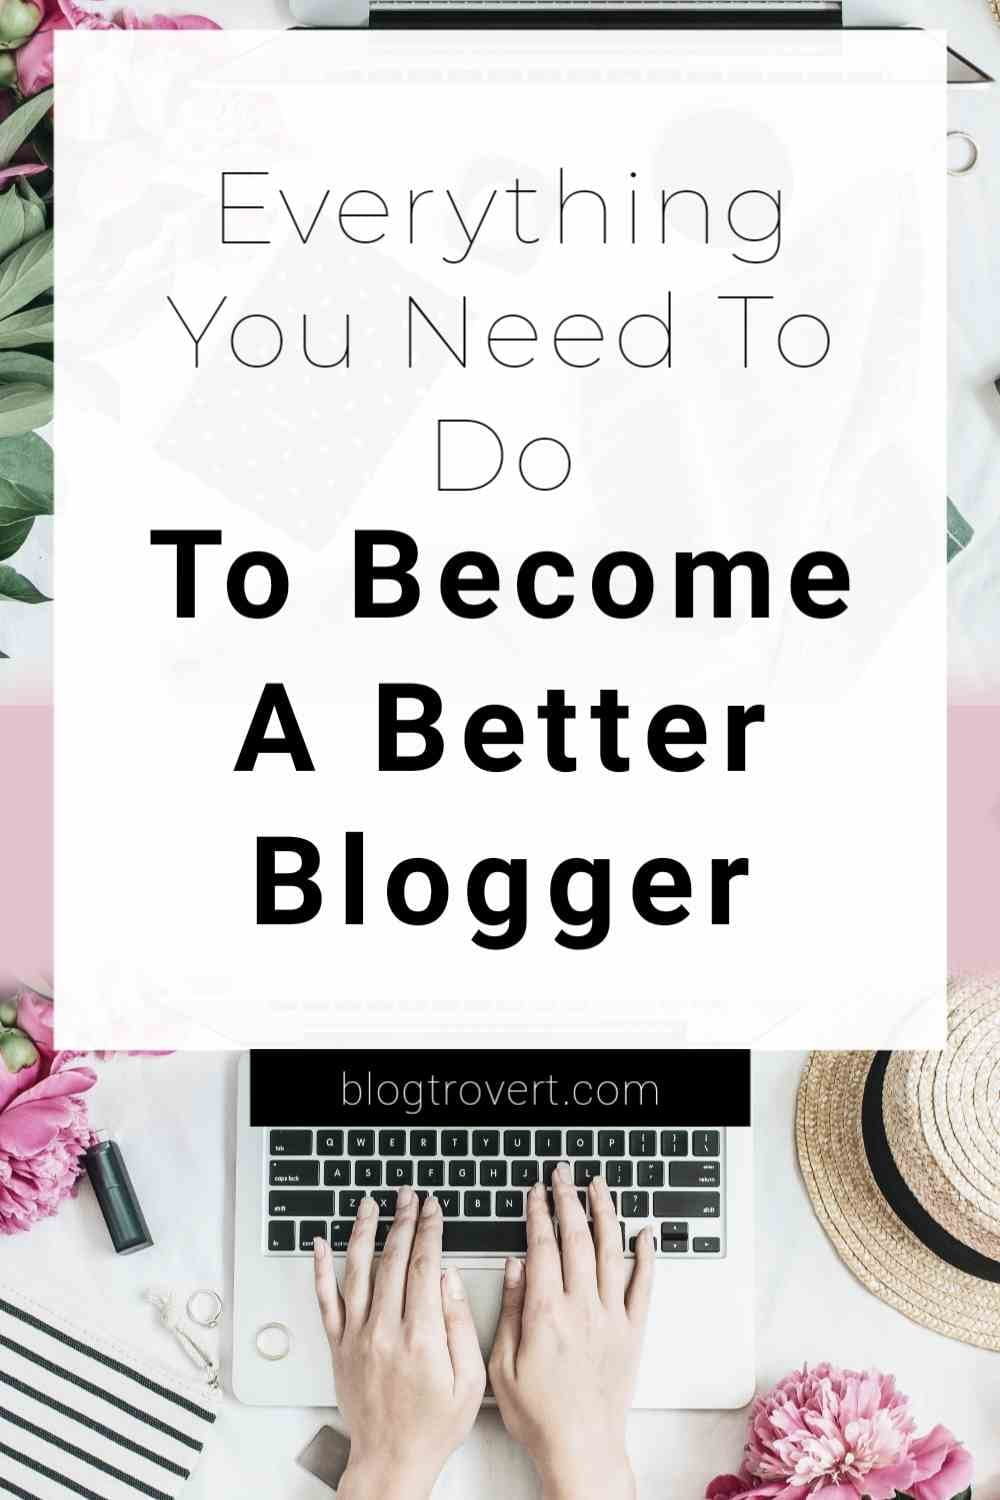 How To Become a Better Blogger - 13 helpful guides for Amateur bloggers 3